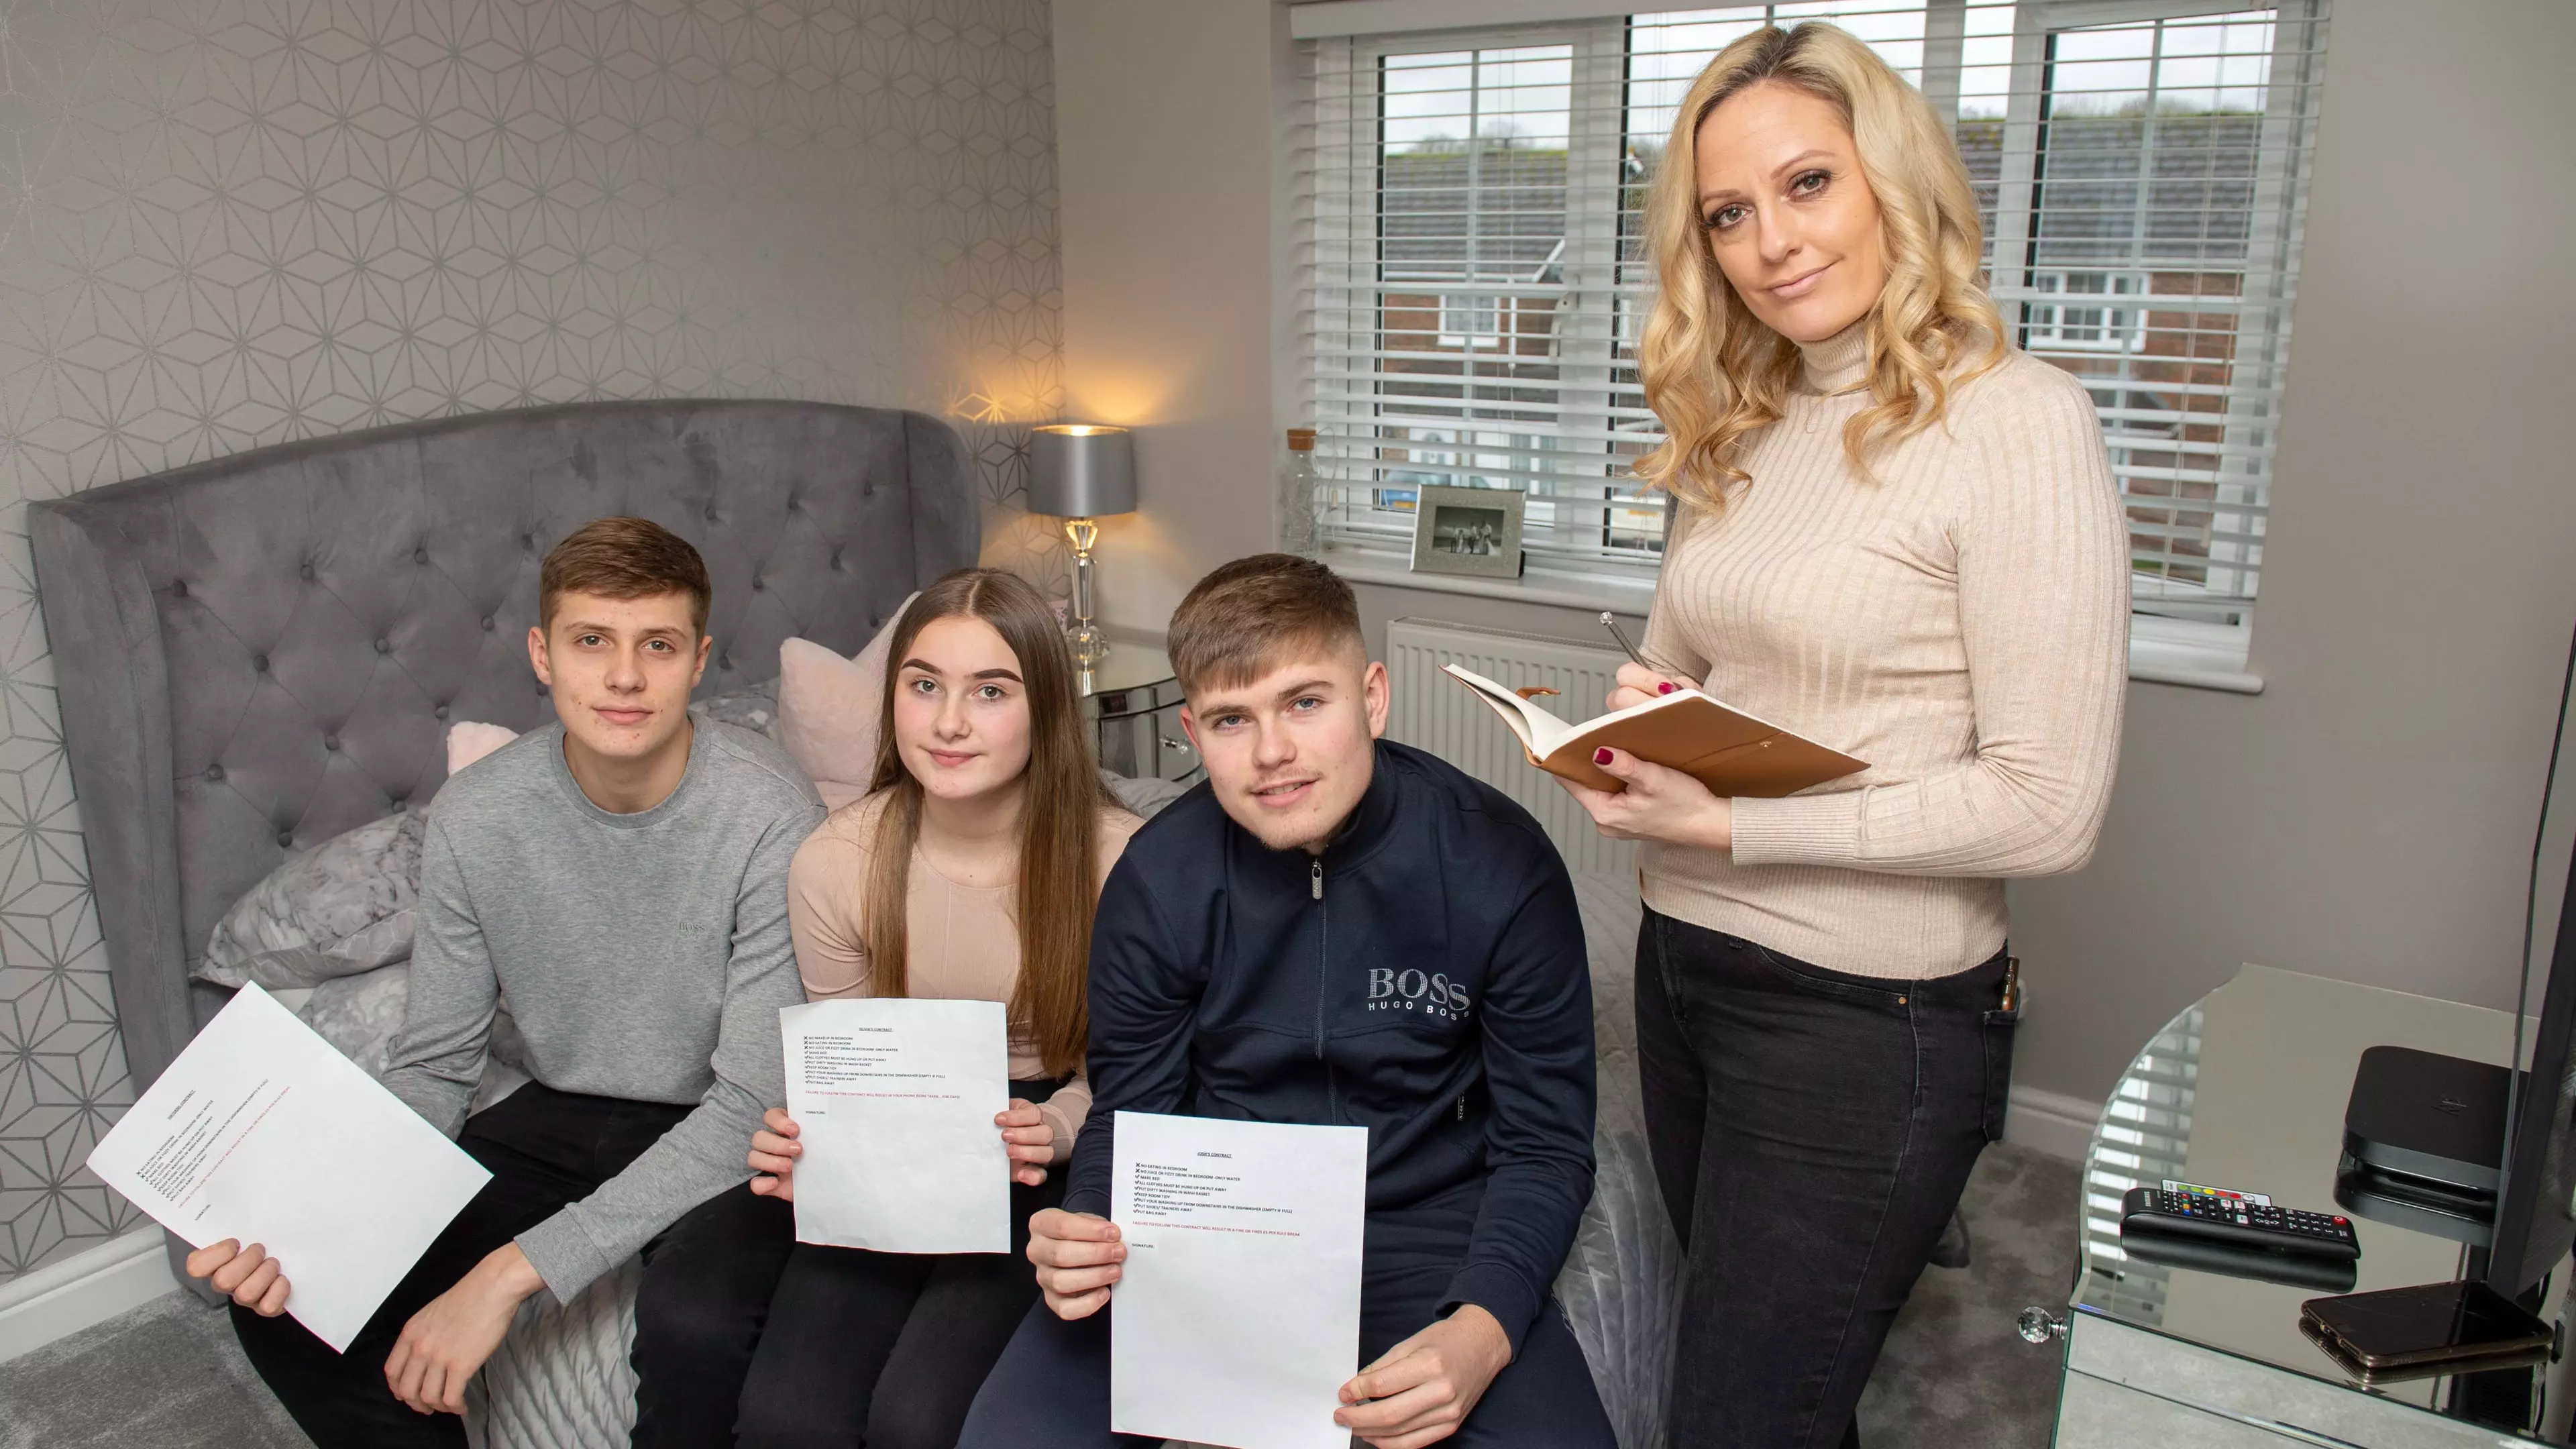 Mum Makes Kids Sign Contracts Agreeing To Clean Up After Themselves